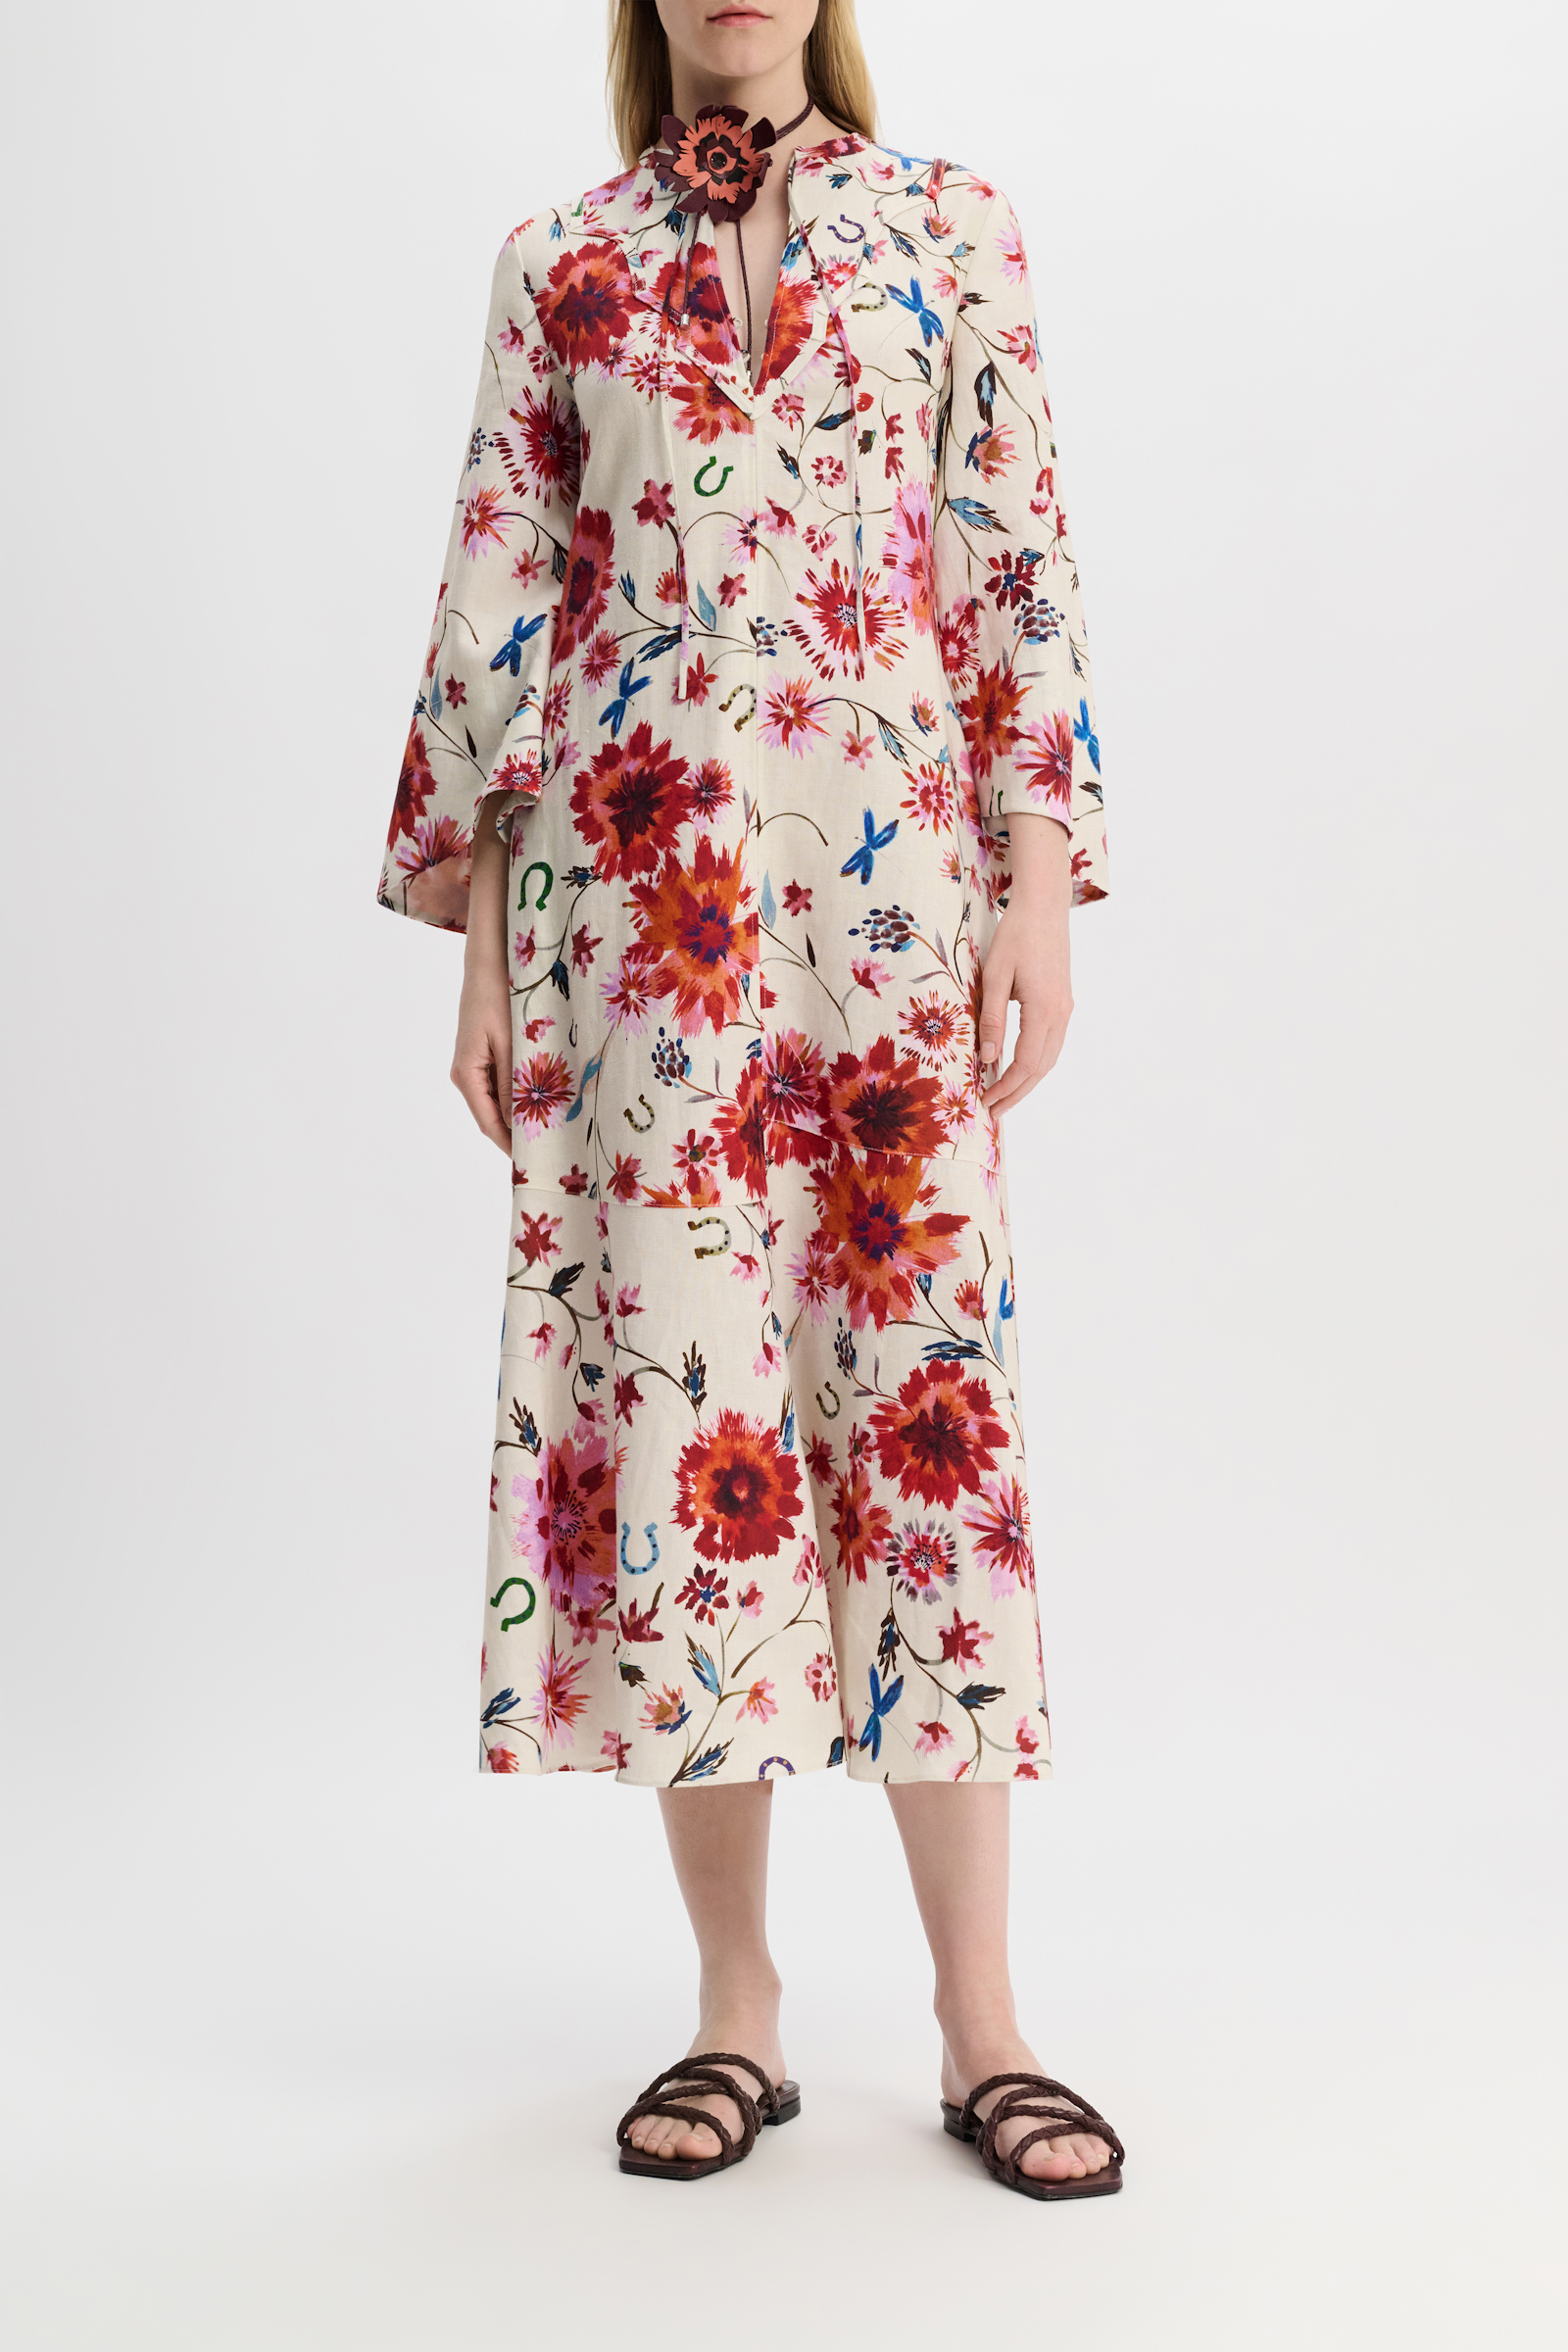 Dorothee Schumacher Printed linen midi-dress with Western-inspired front plastron floral mix